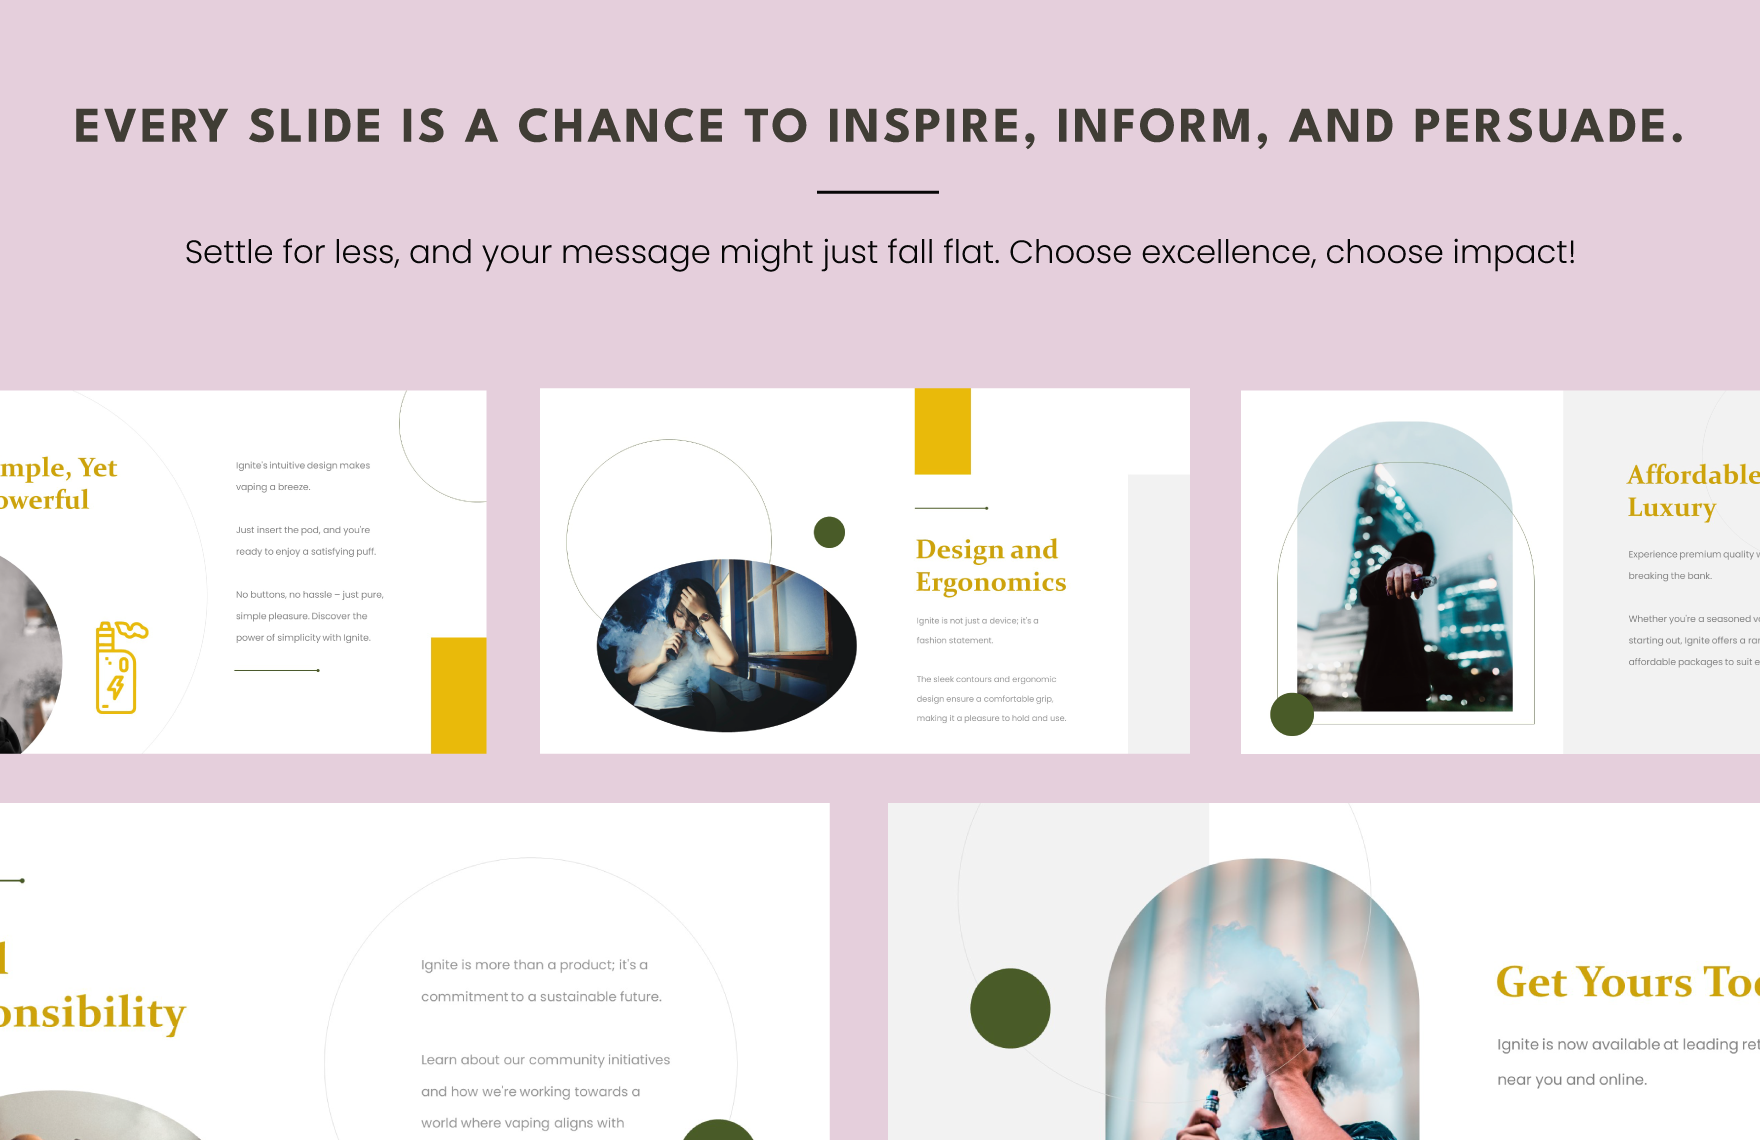 Flipbook for Product Launch Template